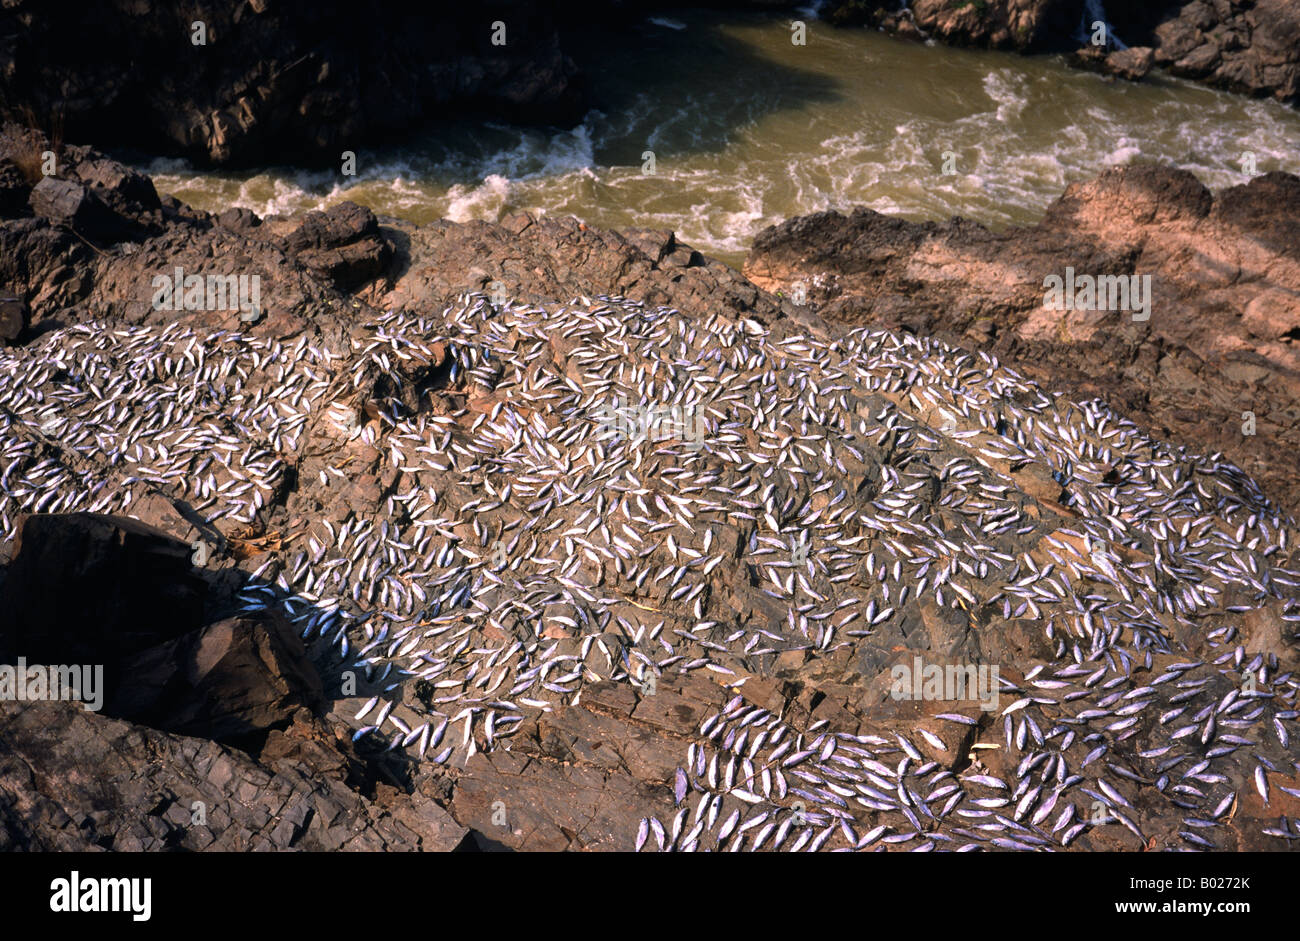 Feb 13, 2003 - Fish left to dry at Khone Falls (Somphamit Rapids) of the Mekong at Si Phan Don (4000 Islands) in Southern Laos. Stock Photo